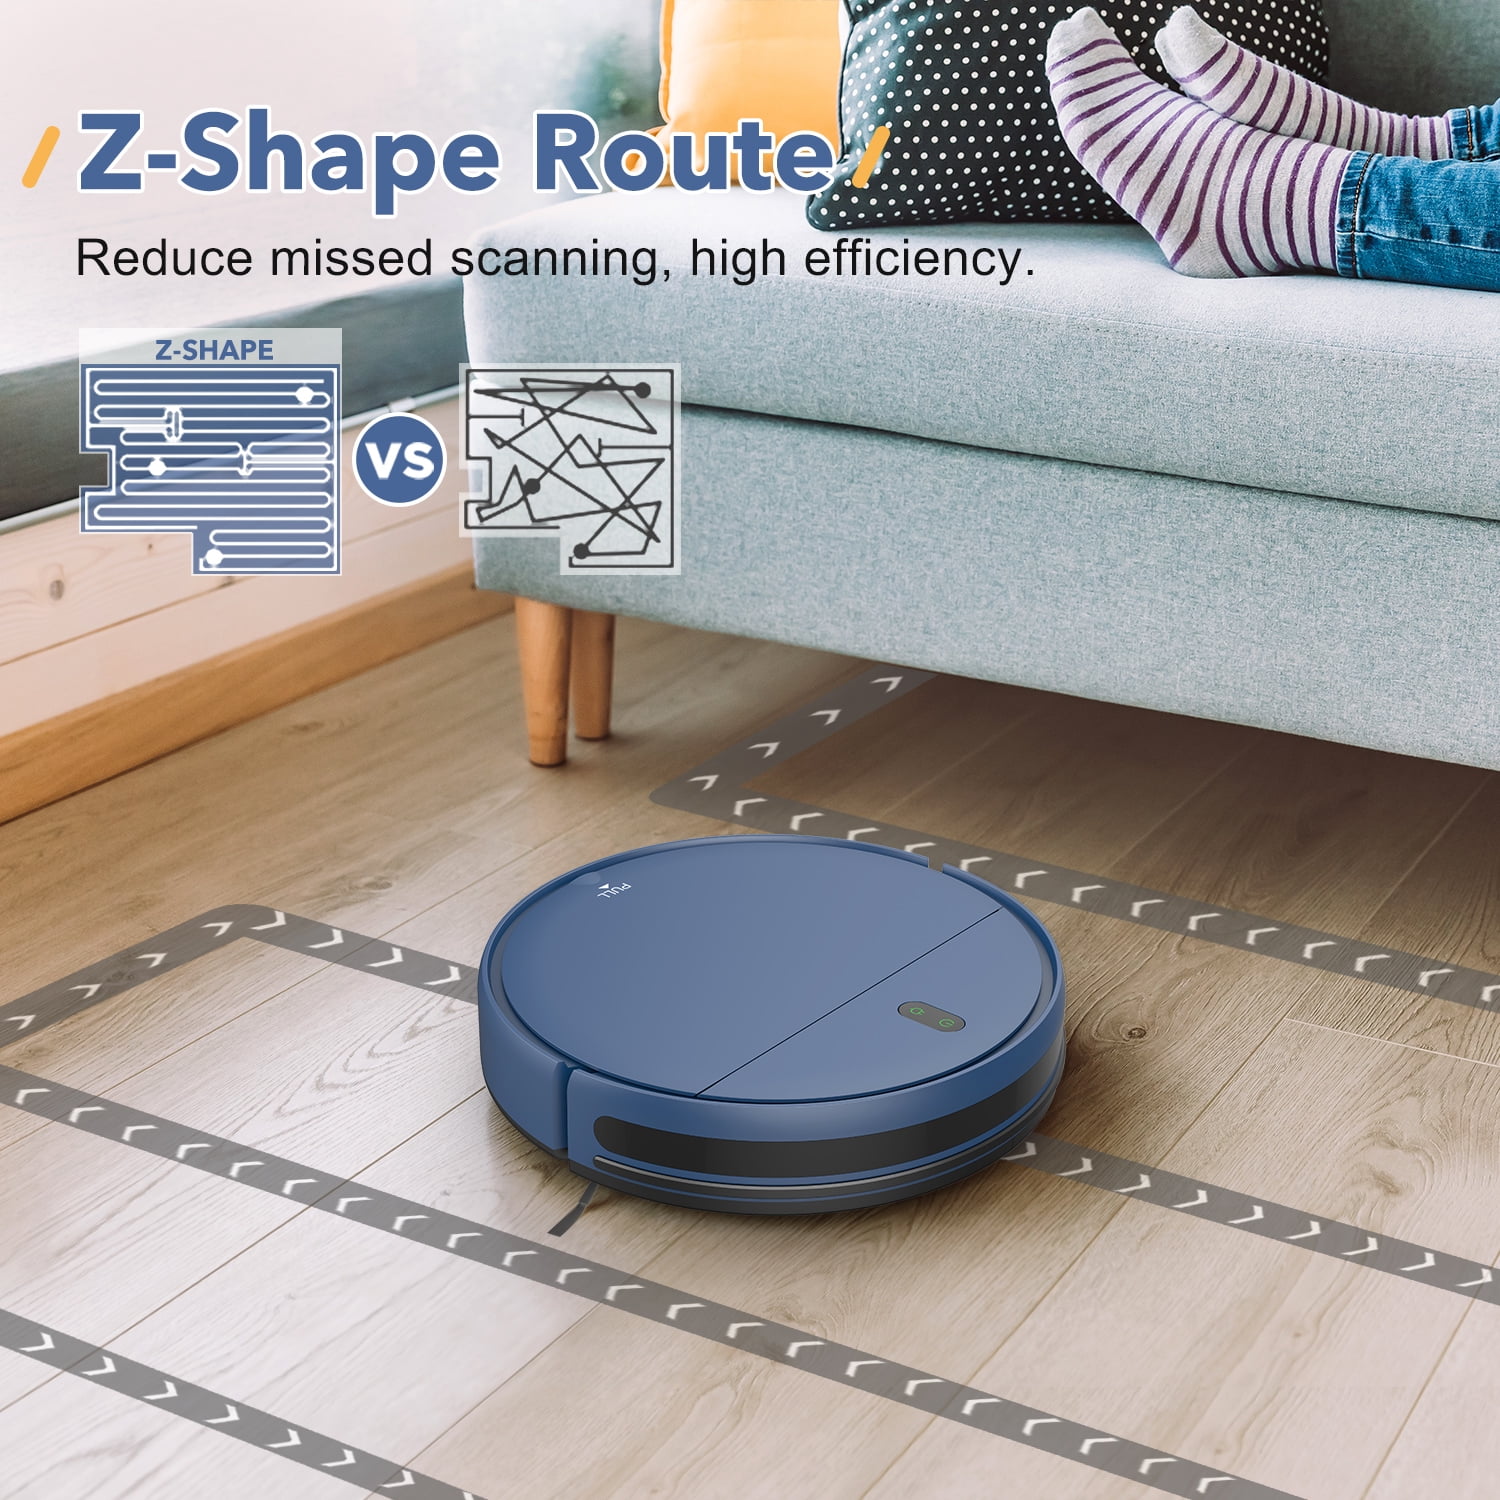 SIQDAK Robot Vacuum Cleaner 1800Pa Strong Suction Intelligent Sweeping Mopping Automatic Robotic Vacuum with Timer Function Multiple Cleaning Modes for Pet Hair Hard Floor Carpet 